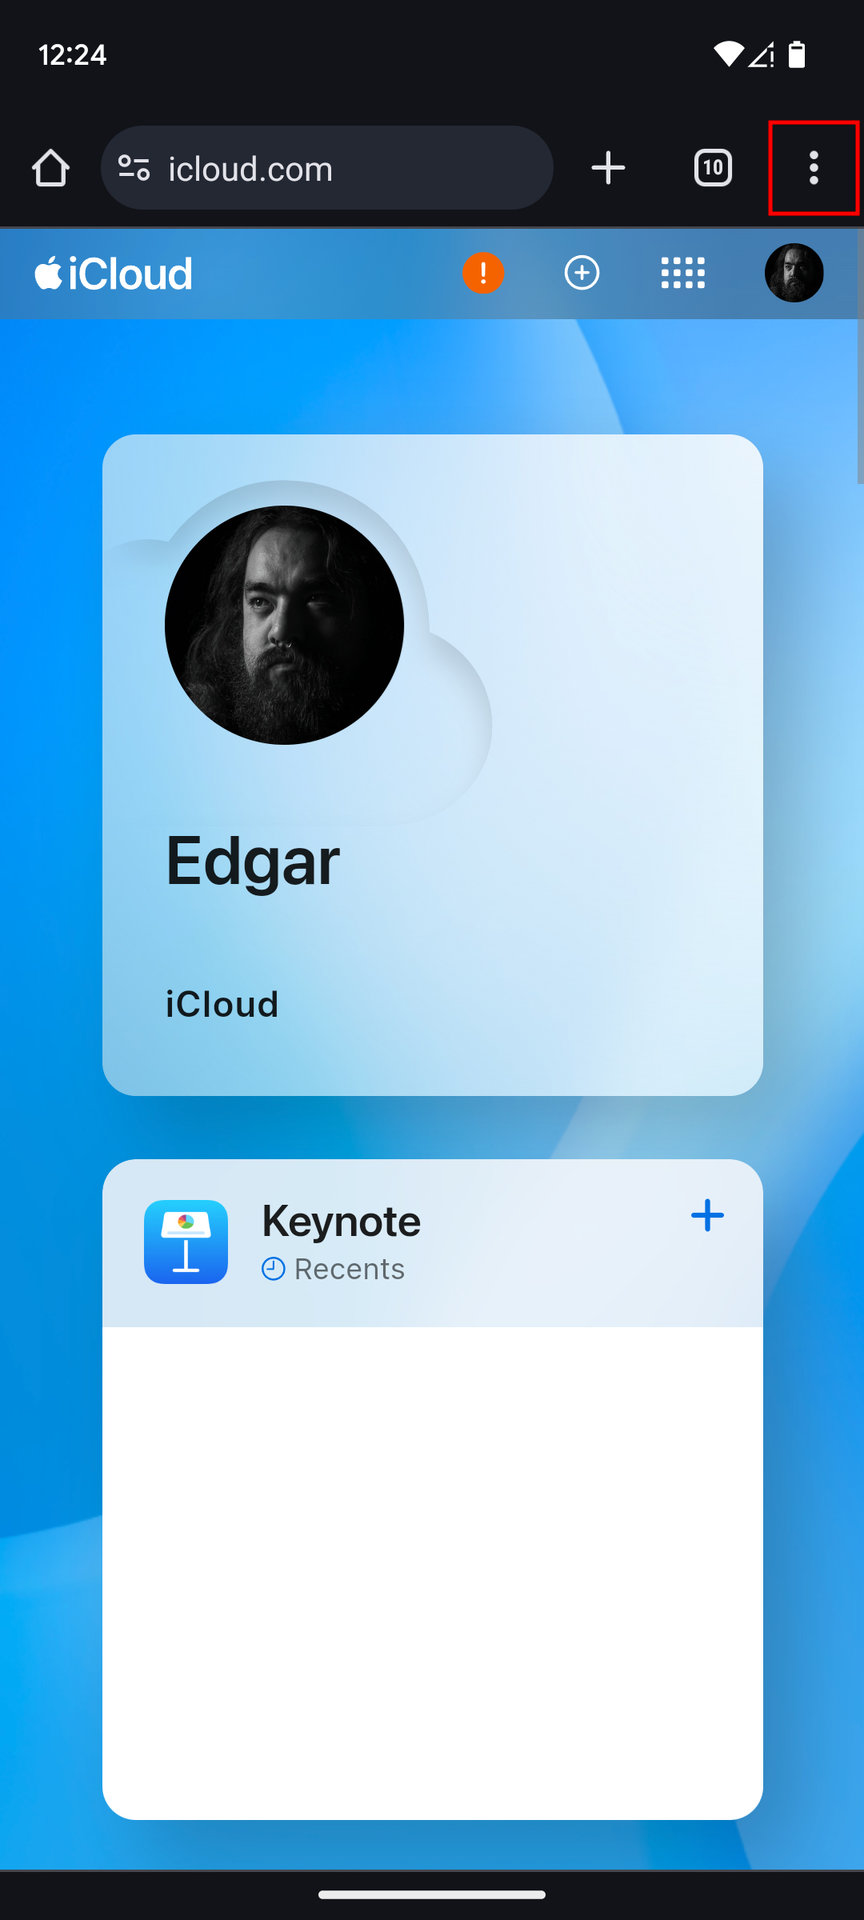 How to download your contacts from iCloud (1)